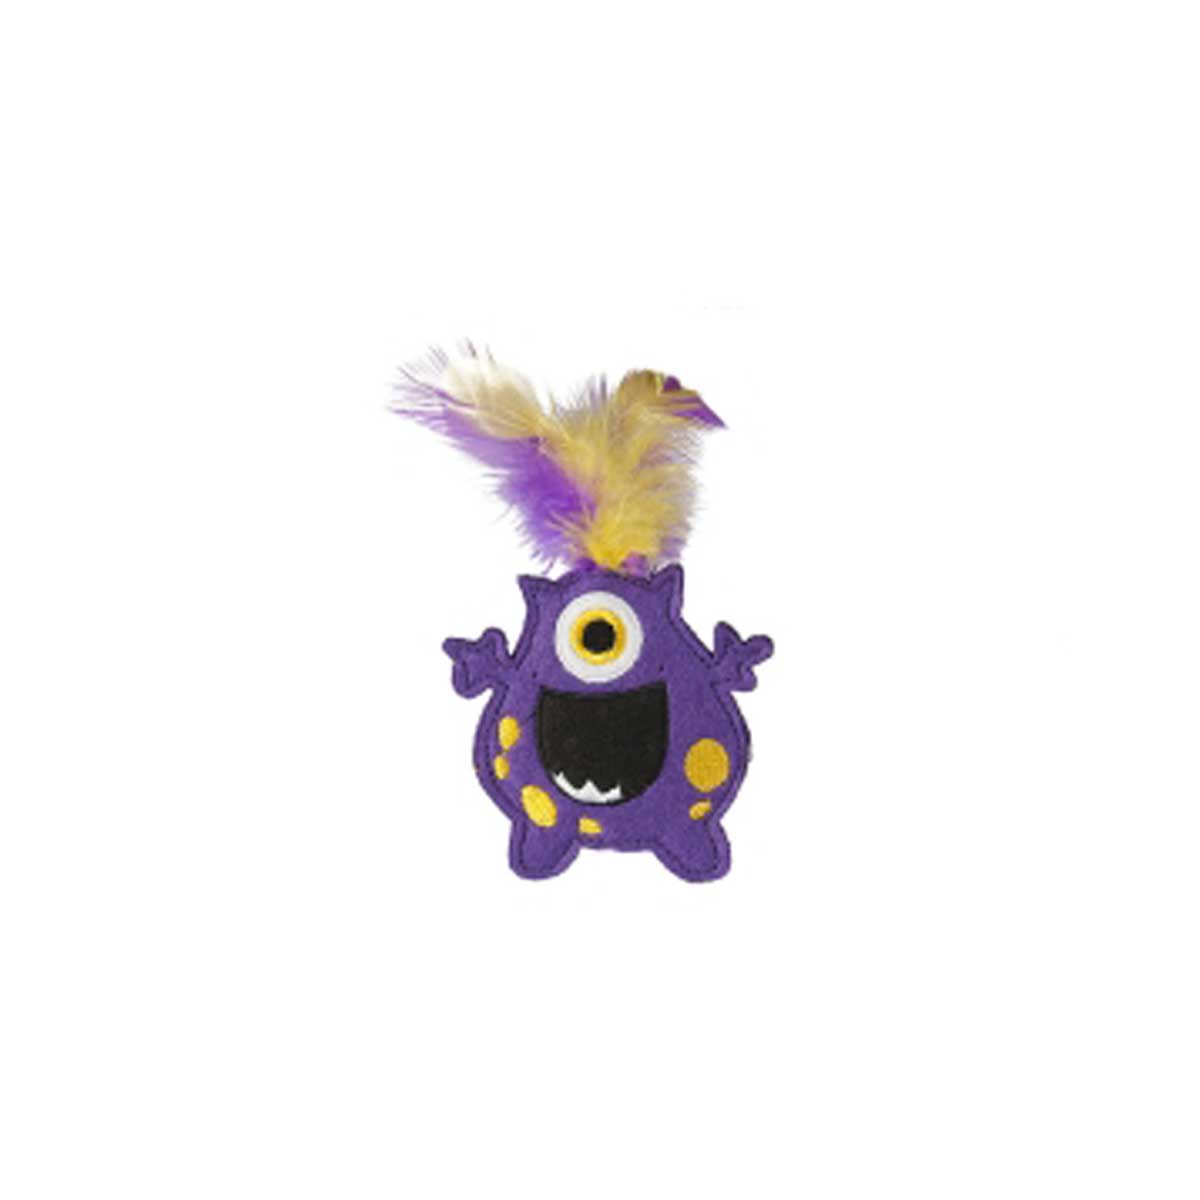 Monsters Catnip Toys in Multiply Colors | Pawlicious & Company